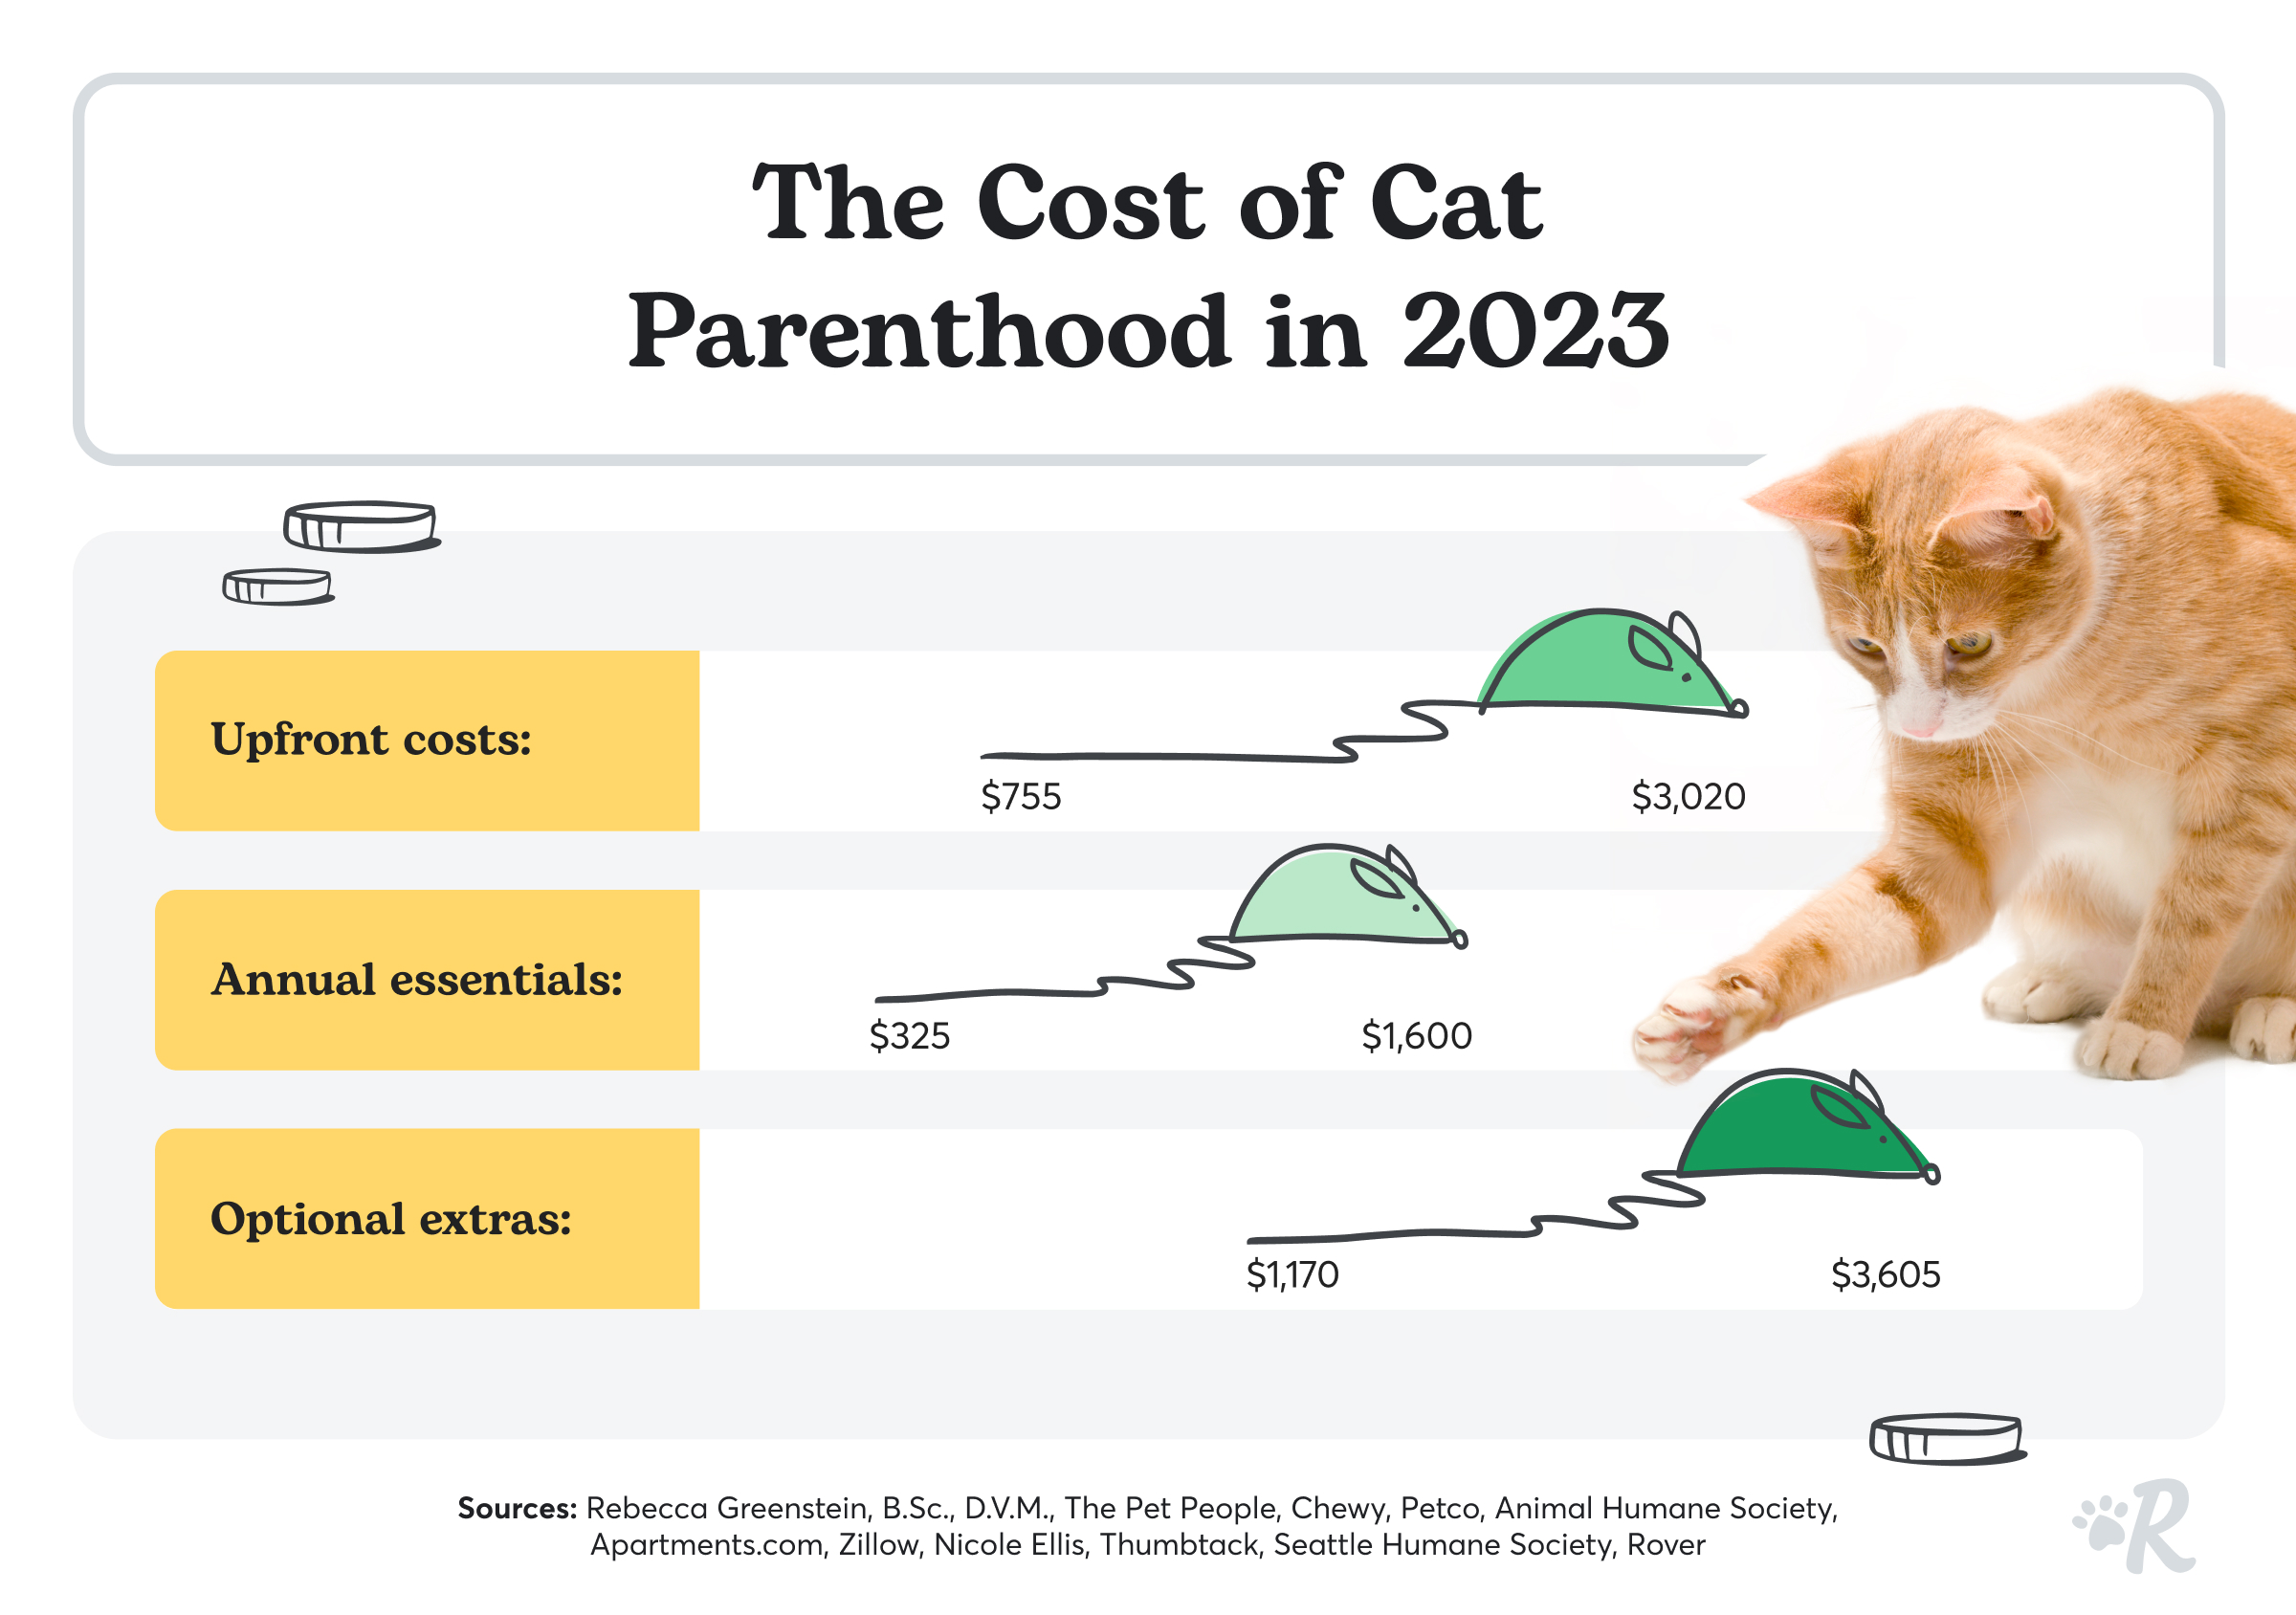 RoverBranded_CostOfPetParenthood_2022_CostOverview_Cat_US